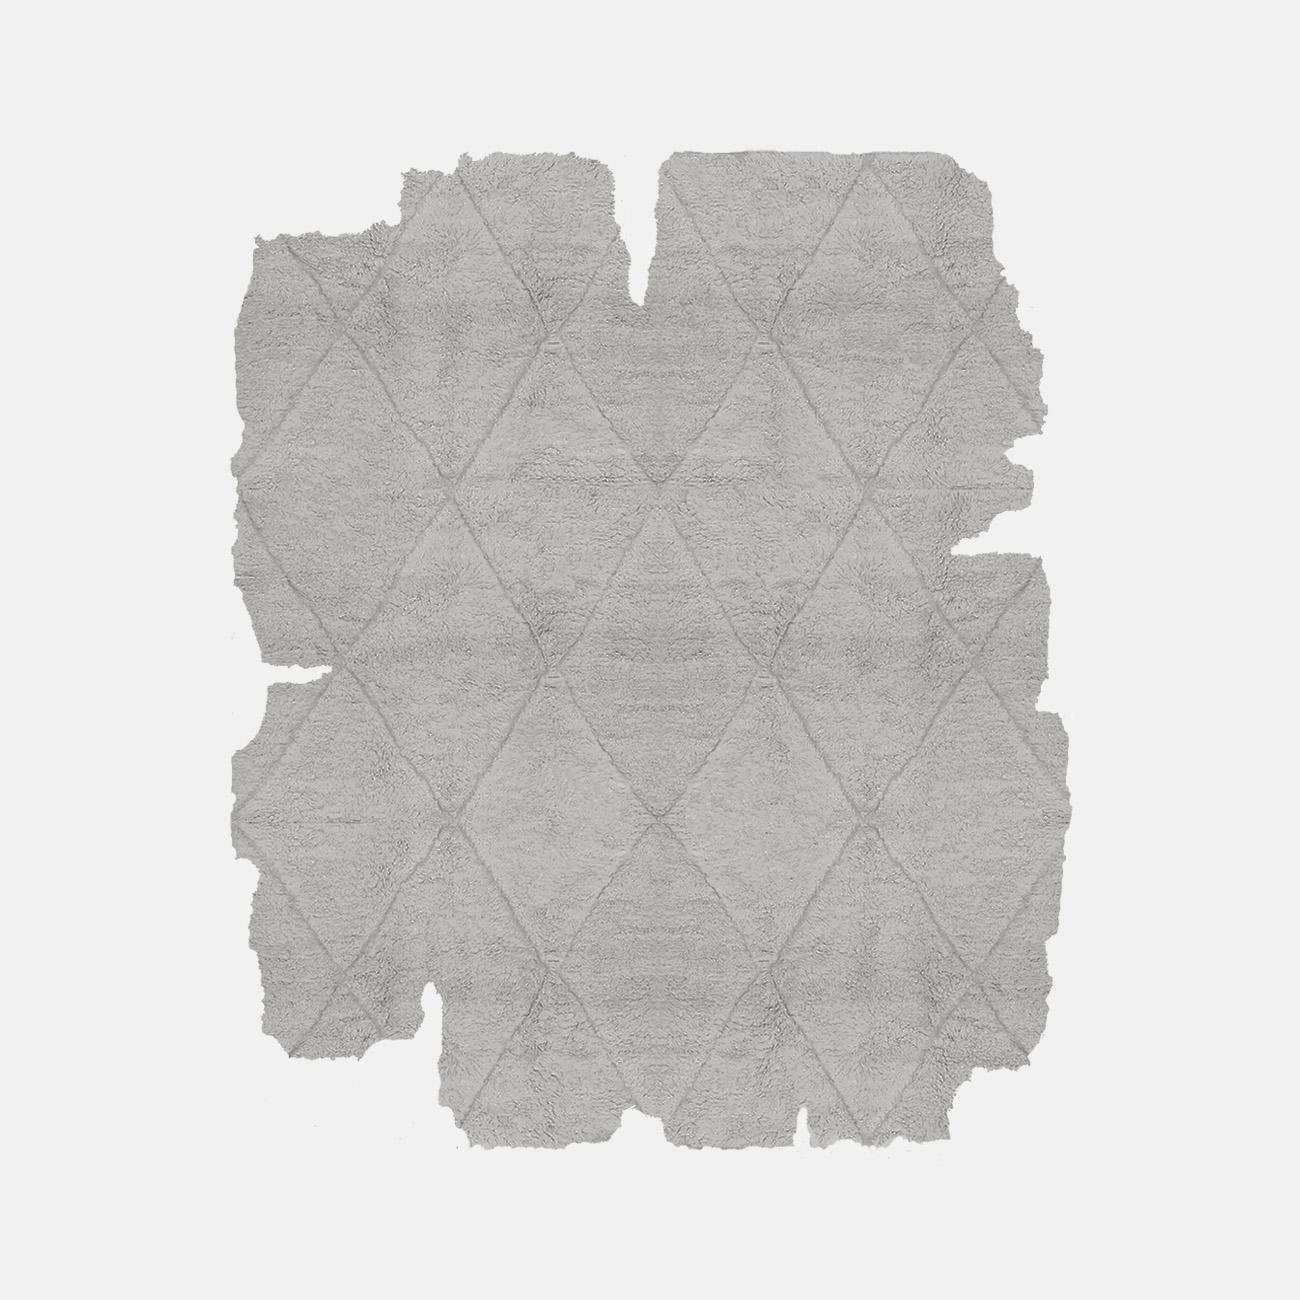 Bevanti Fog Edit Rug by Atelier Bowy C.D.
Dimensions: W 243 x L 300 cm.
Materials: Wool.

Available in W140 x L220, W170 x L240, W210 x L300, W230 x L300, W243 x L300 cm.

Atelier Bowy C.D. is dedicated to crafting contemporary handmade rugs for